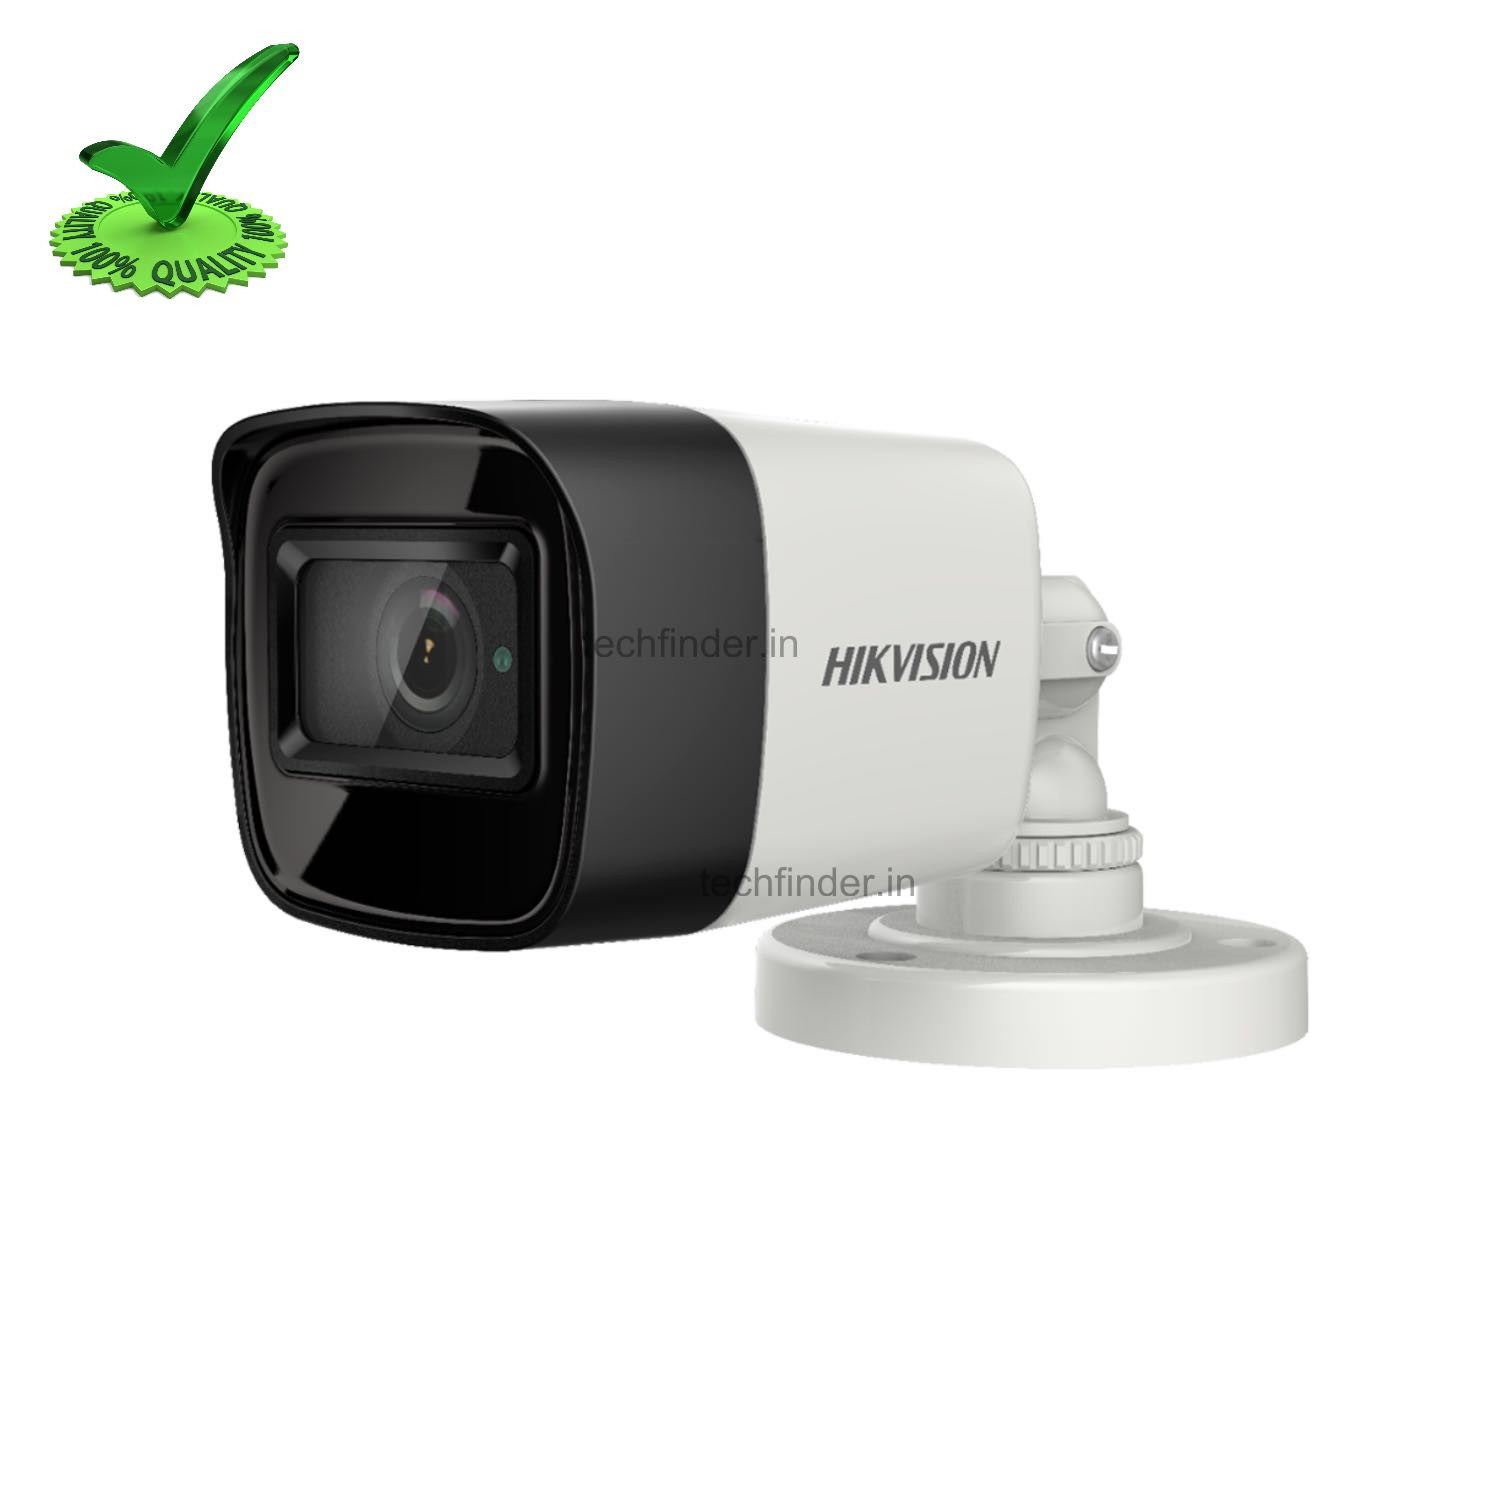 Hikvision DS-2CE16U1T-ITF 8.29MP Fully Metal HD Bullet Camera